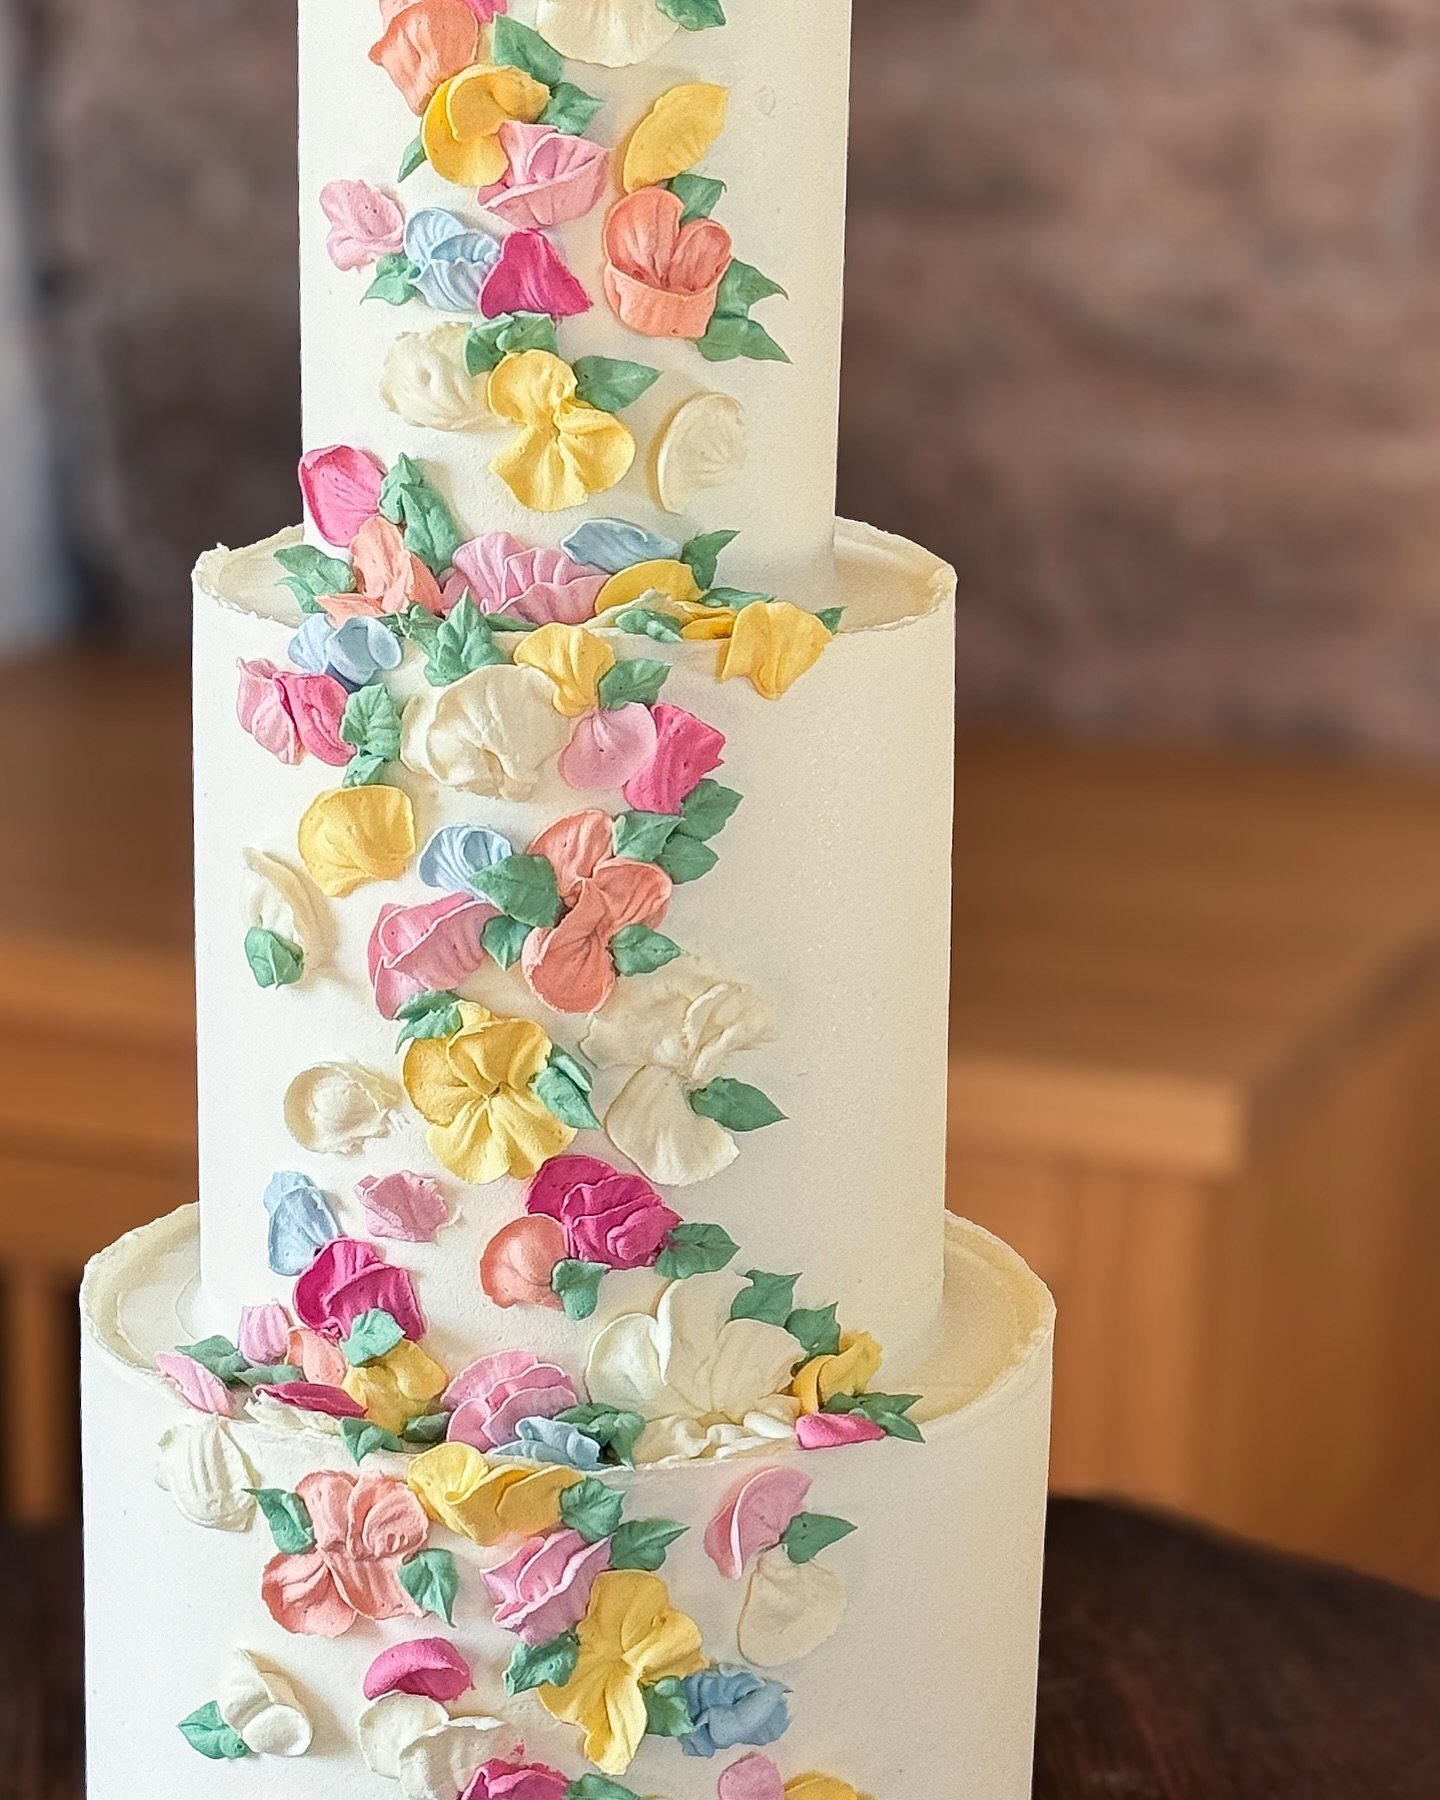 Petals with a pop of colour for A&amp;J

Summer is definitely on its way and it was full of colour @llantiliohouse for this beautiful wedding.  A three tier cake with piped floral petals to complement the colourful decor.

#weddingcake #piping #petal